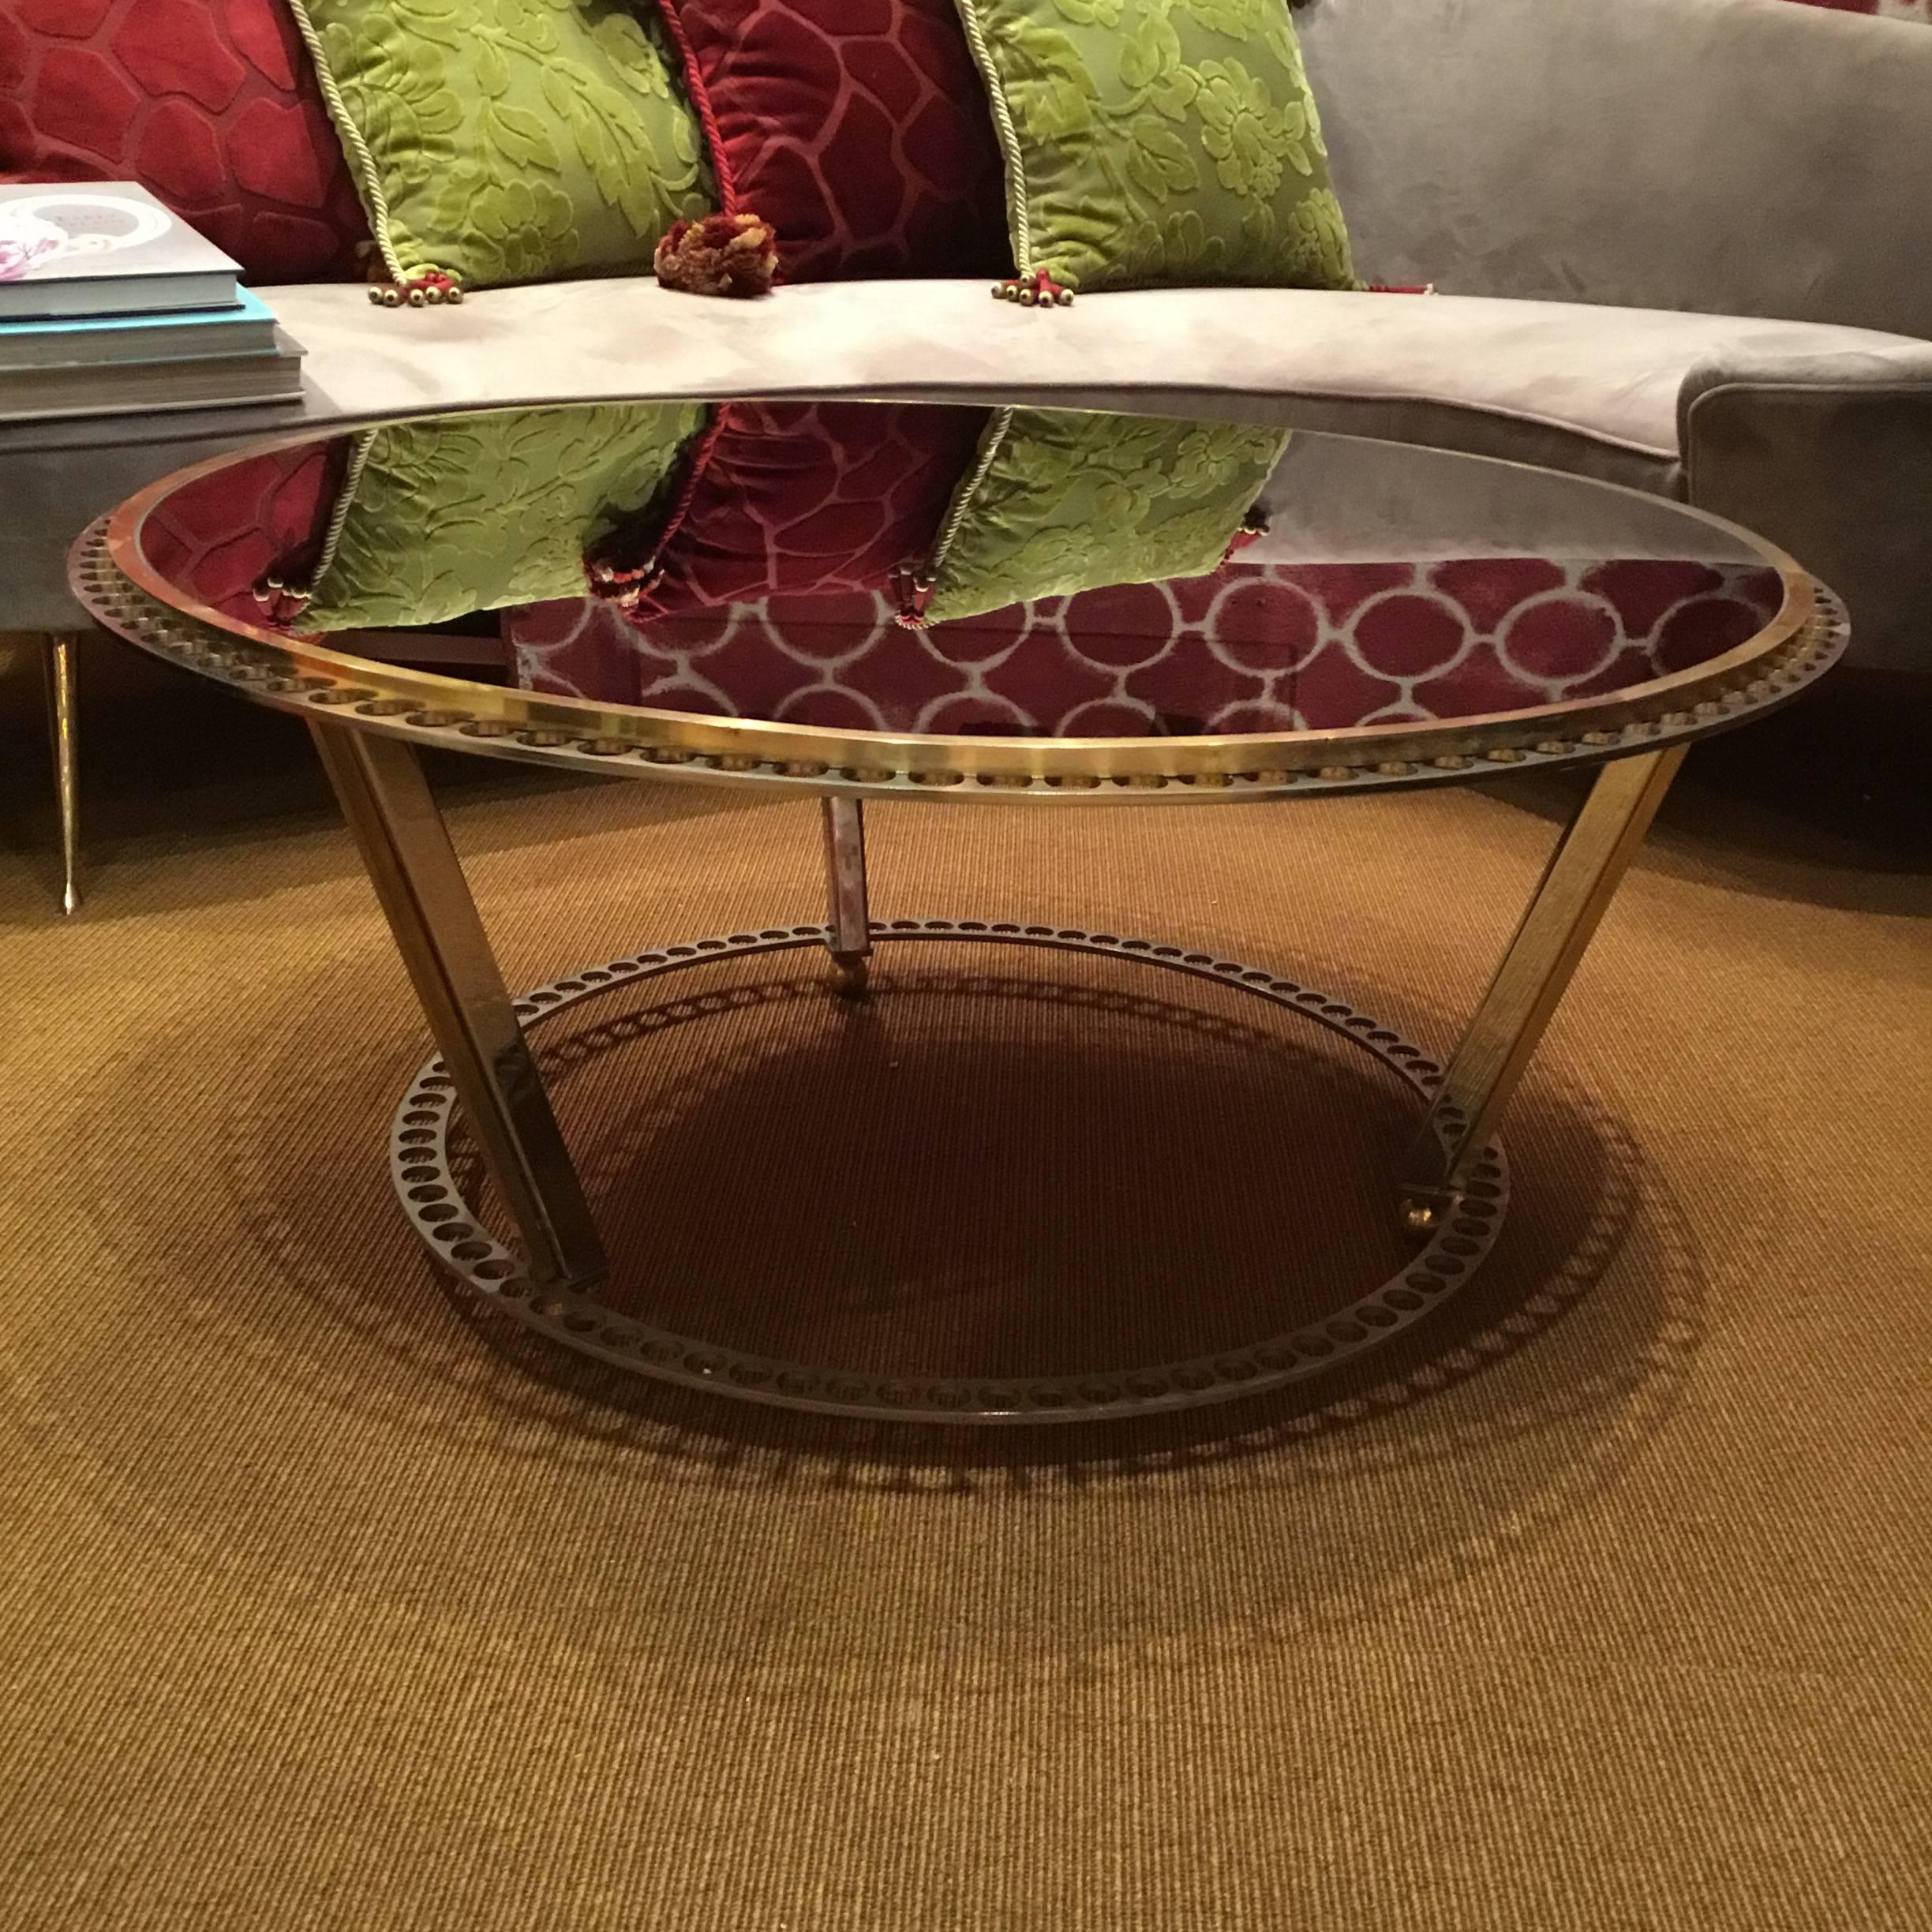 Coffee table with metal structure and black glass top.
made in Italy by a craftman, modern piece 2017